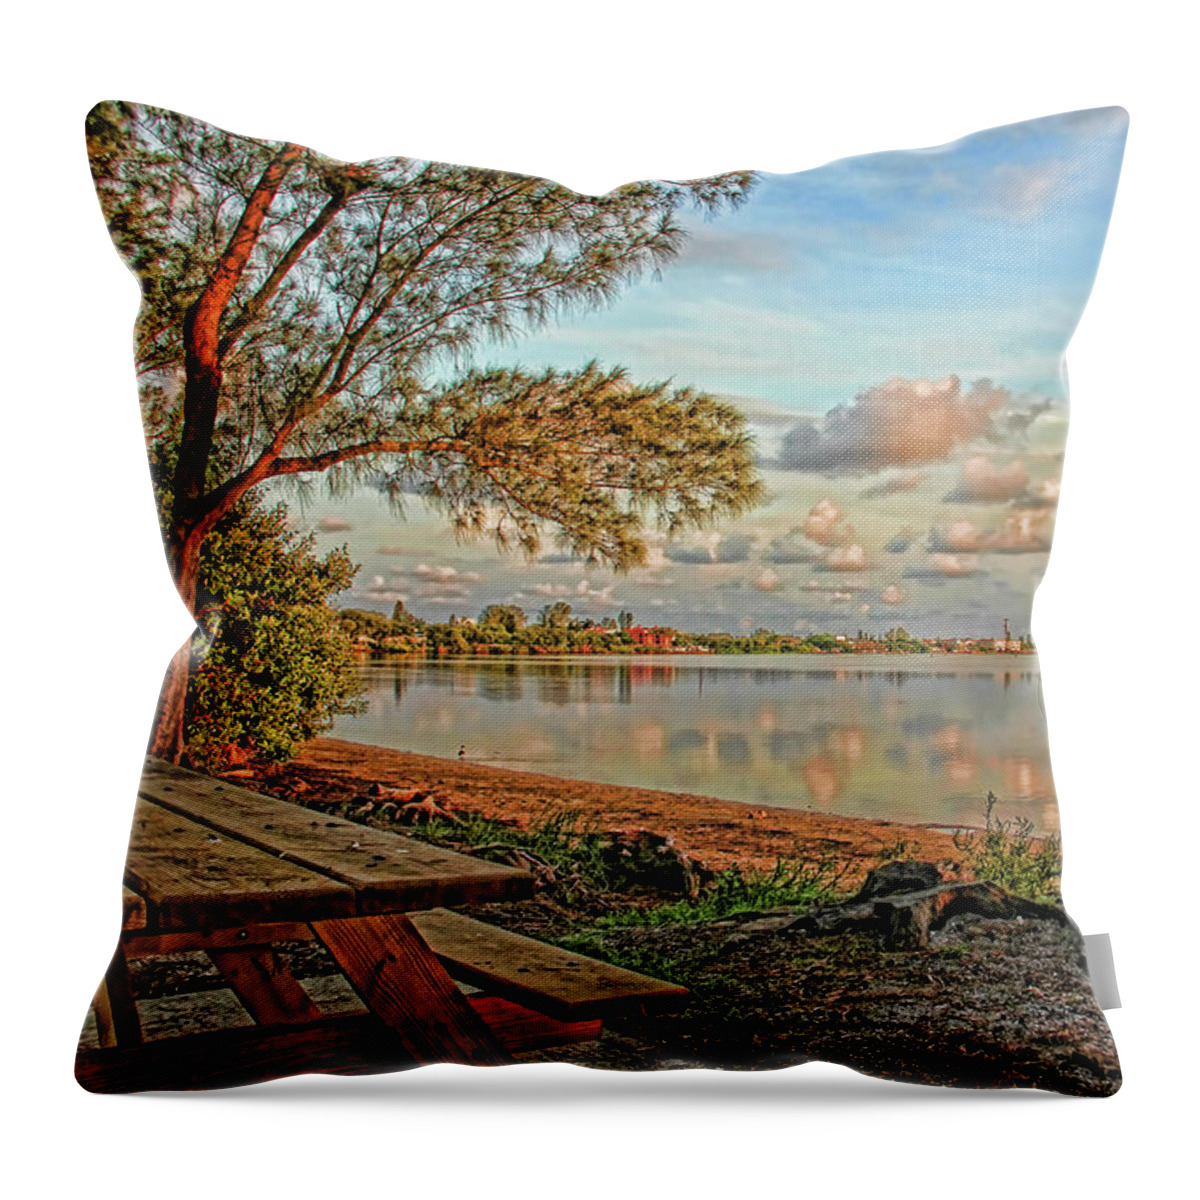 Anna Maria Island Florida Throw Pillow featuring the photograph Morning Quiet by HH Photography of Florida